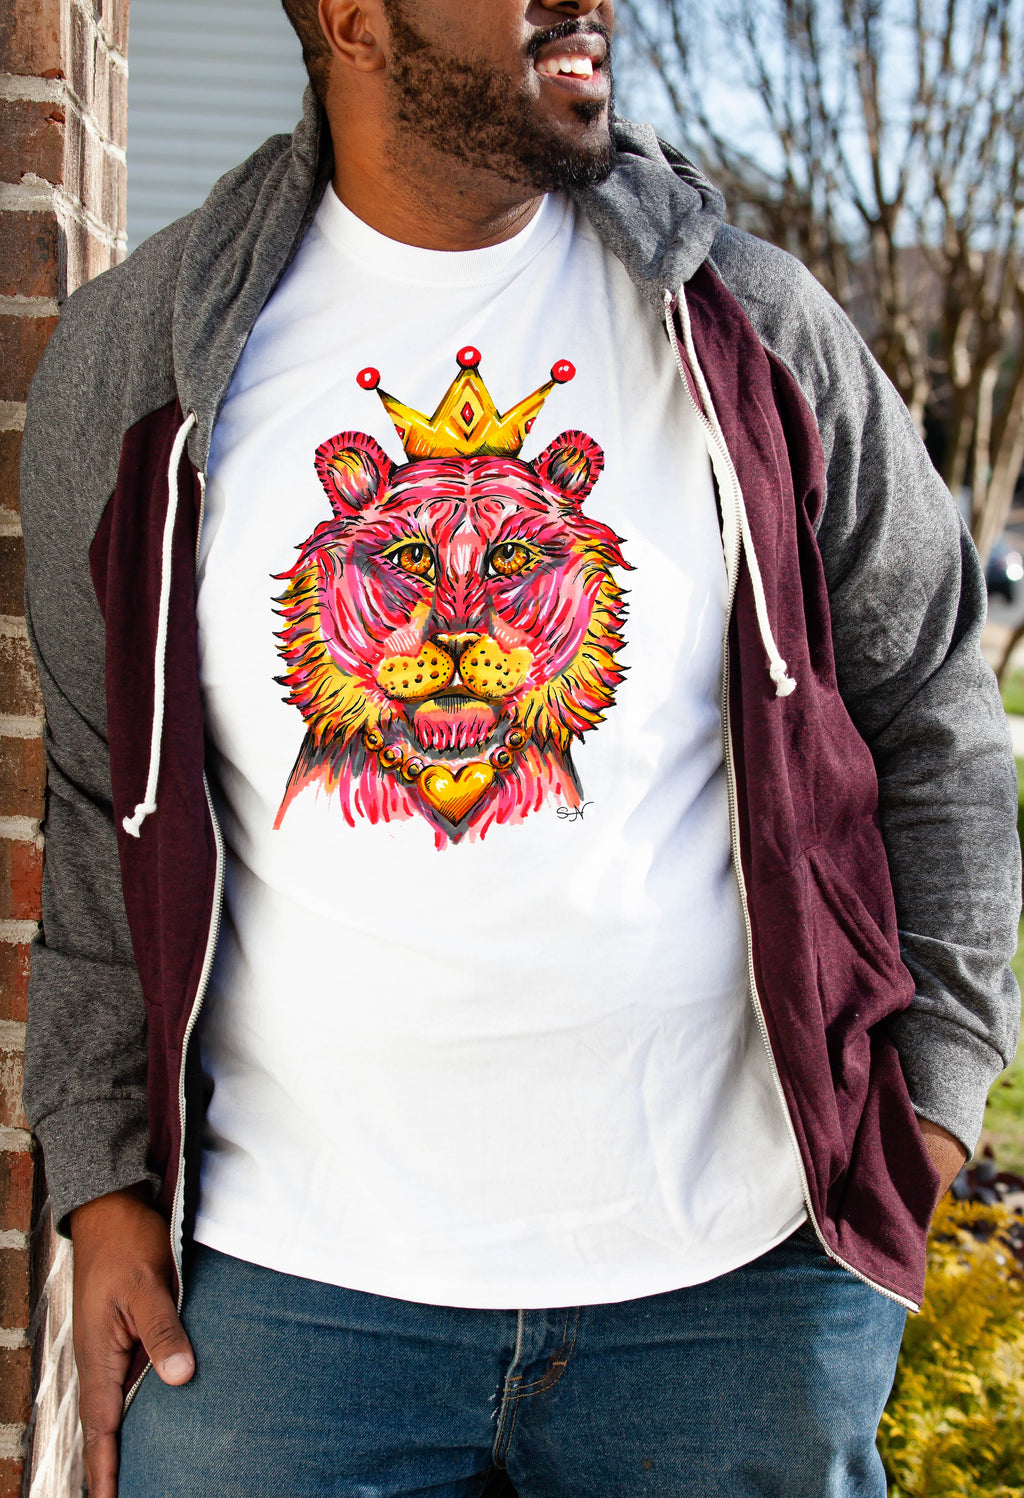 Lion King - Mens T-Shirt - Artwork by the Very Talented Artist Sarah Neville - Made to Order